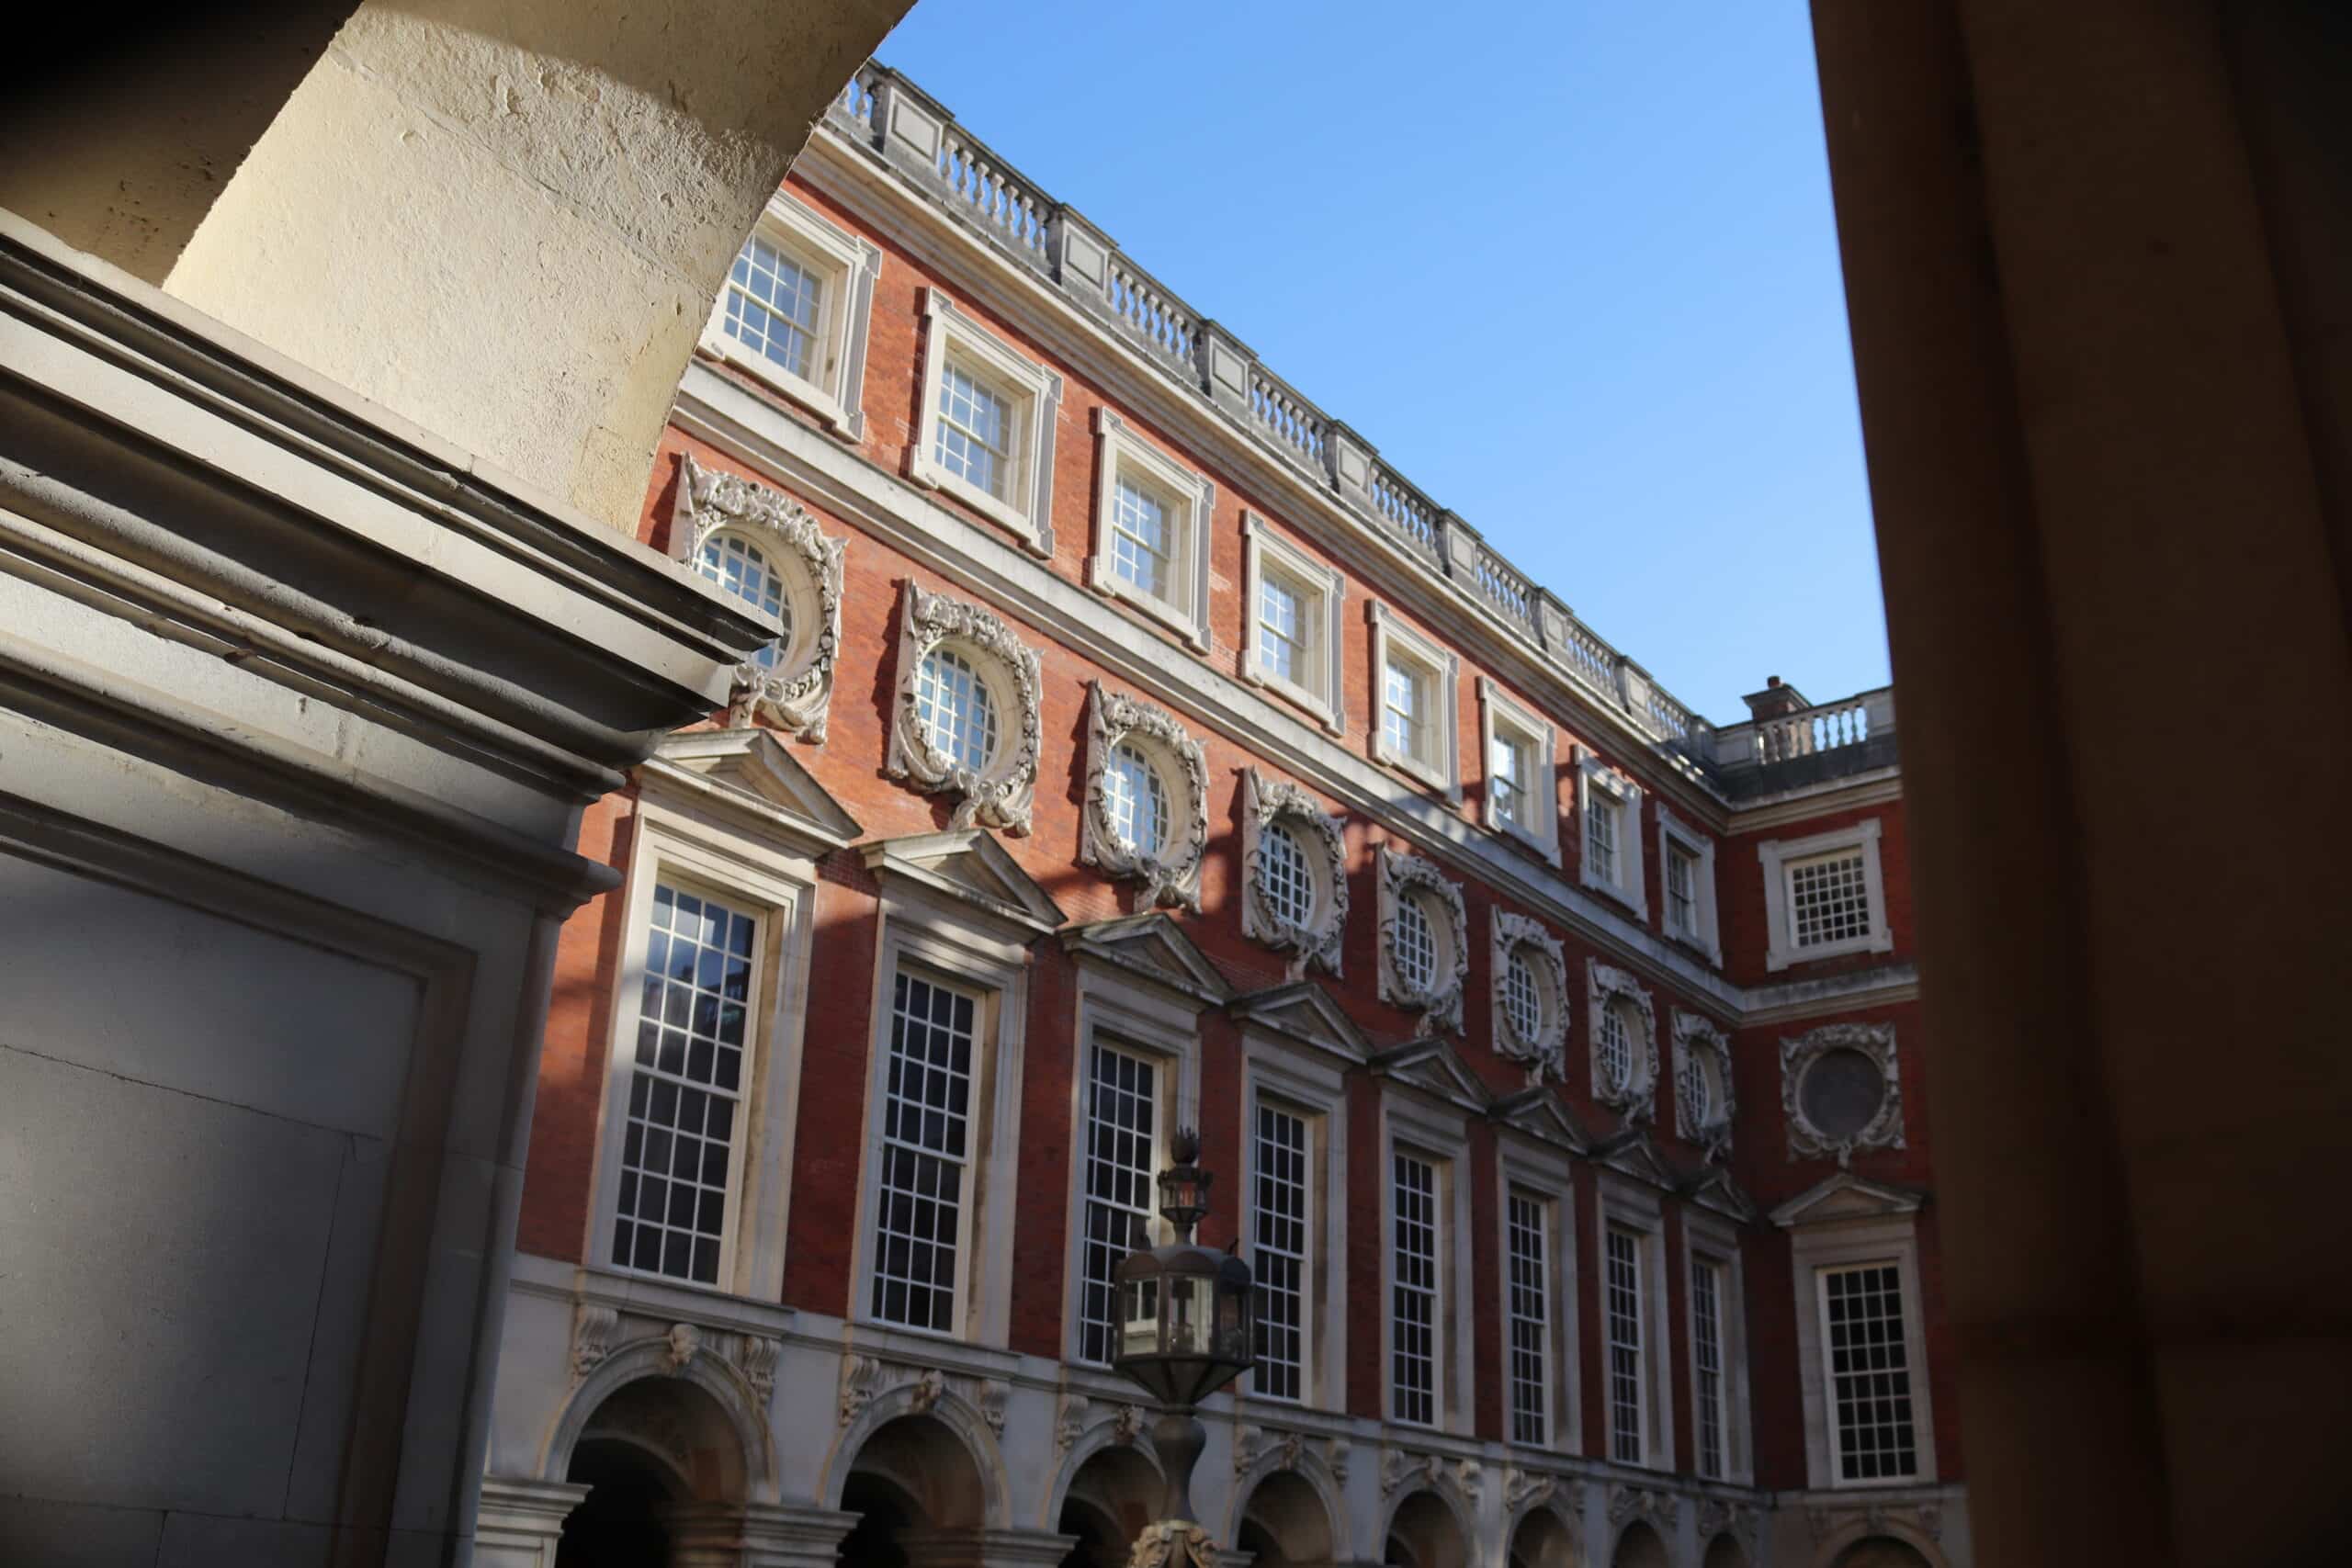 The Fountain Court at Hampton Court Palace, Designed by Sir Christopher Wren.